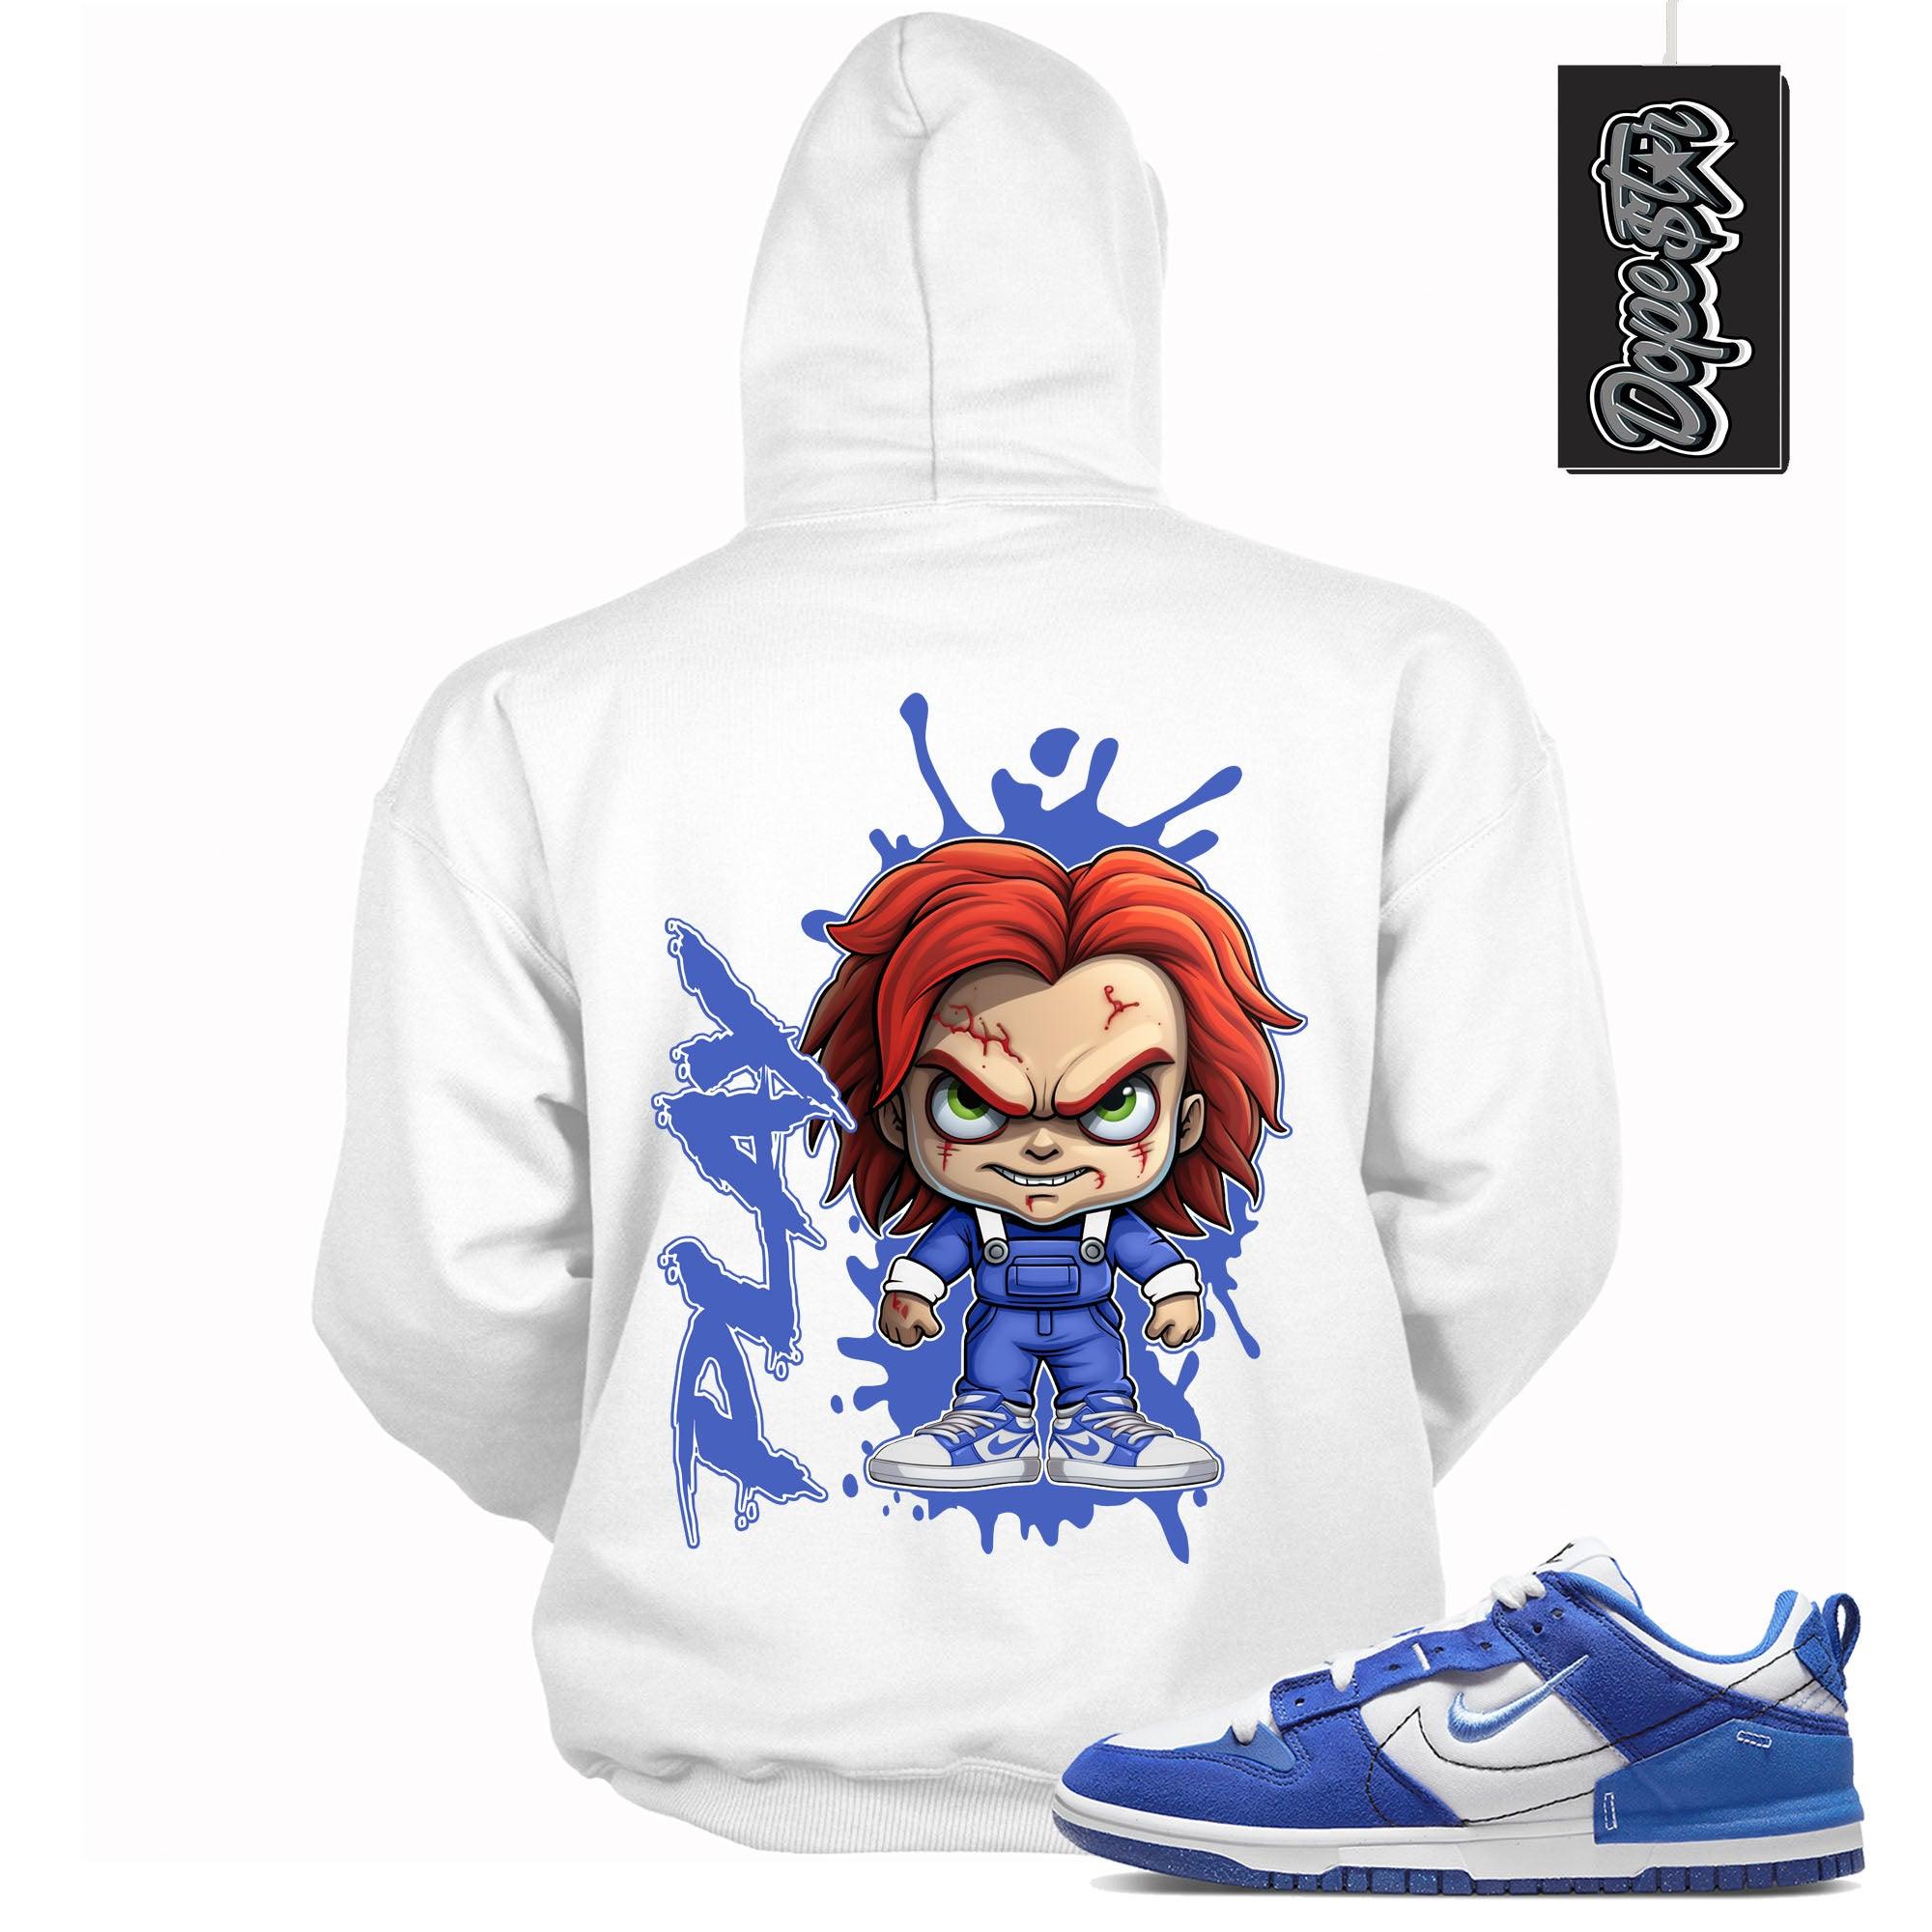 Cool White Graphic Hoodie with “ CHUCKY PLAY “ print, that perfectly matches Nike Dunk Disrupt 2 Hyper Royal sneakers